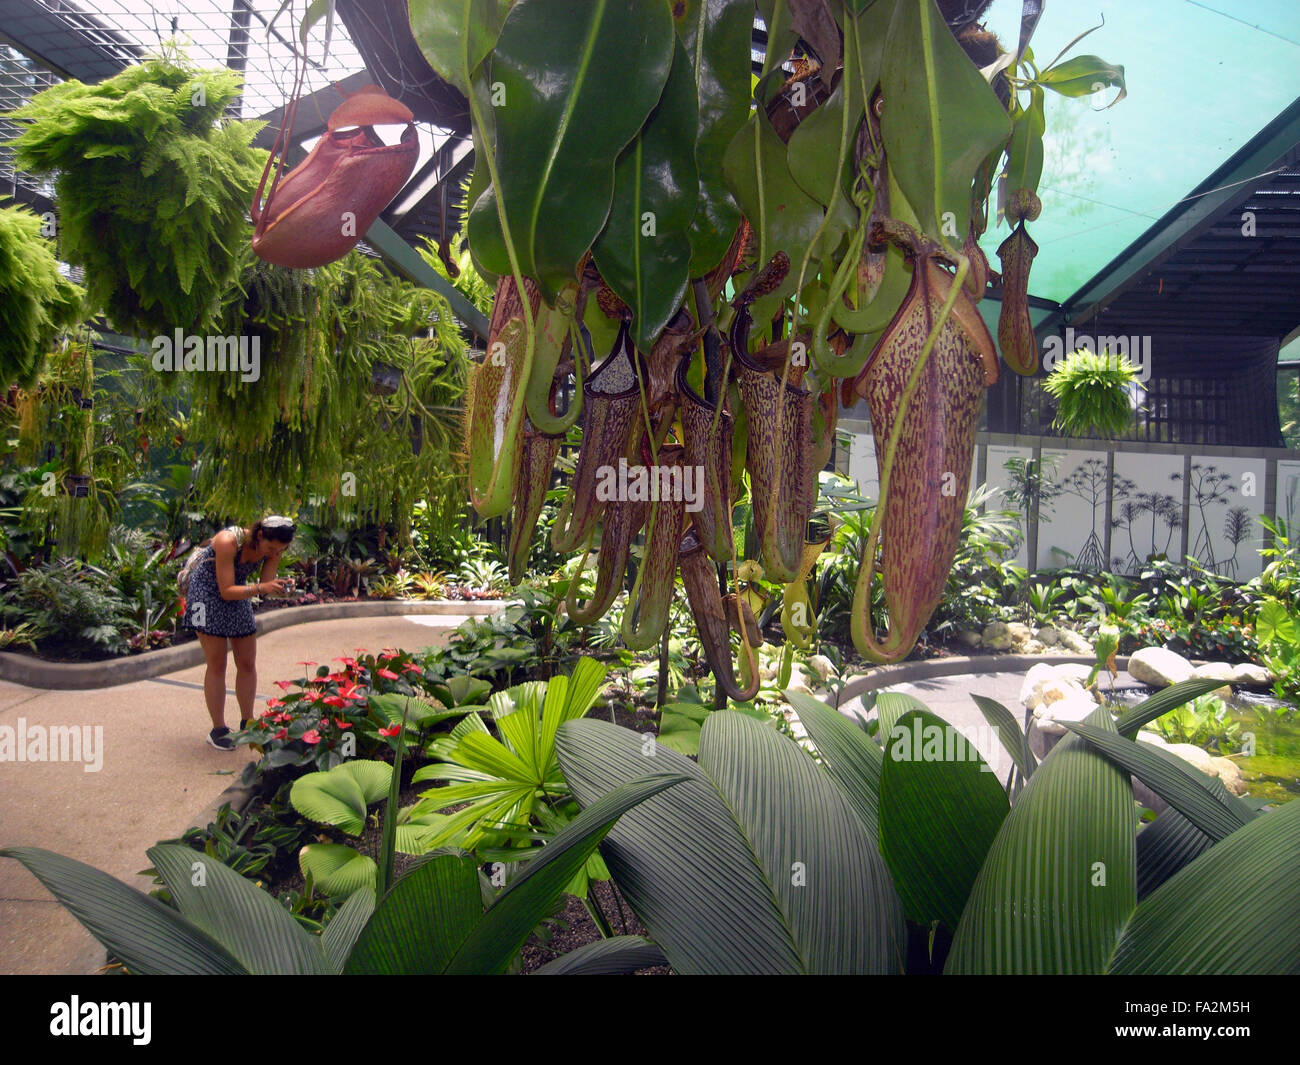 Pitcher plants (Nepenthes sp.), ferns and other lush greenery in the new Cairns Conservatory, Flecker Botanic Gardens, Cairns, Q Stock Photo